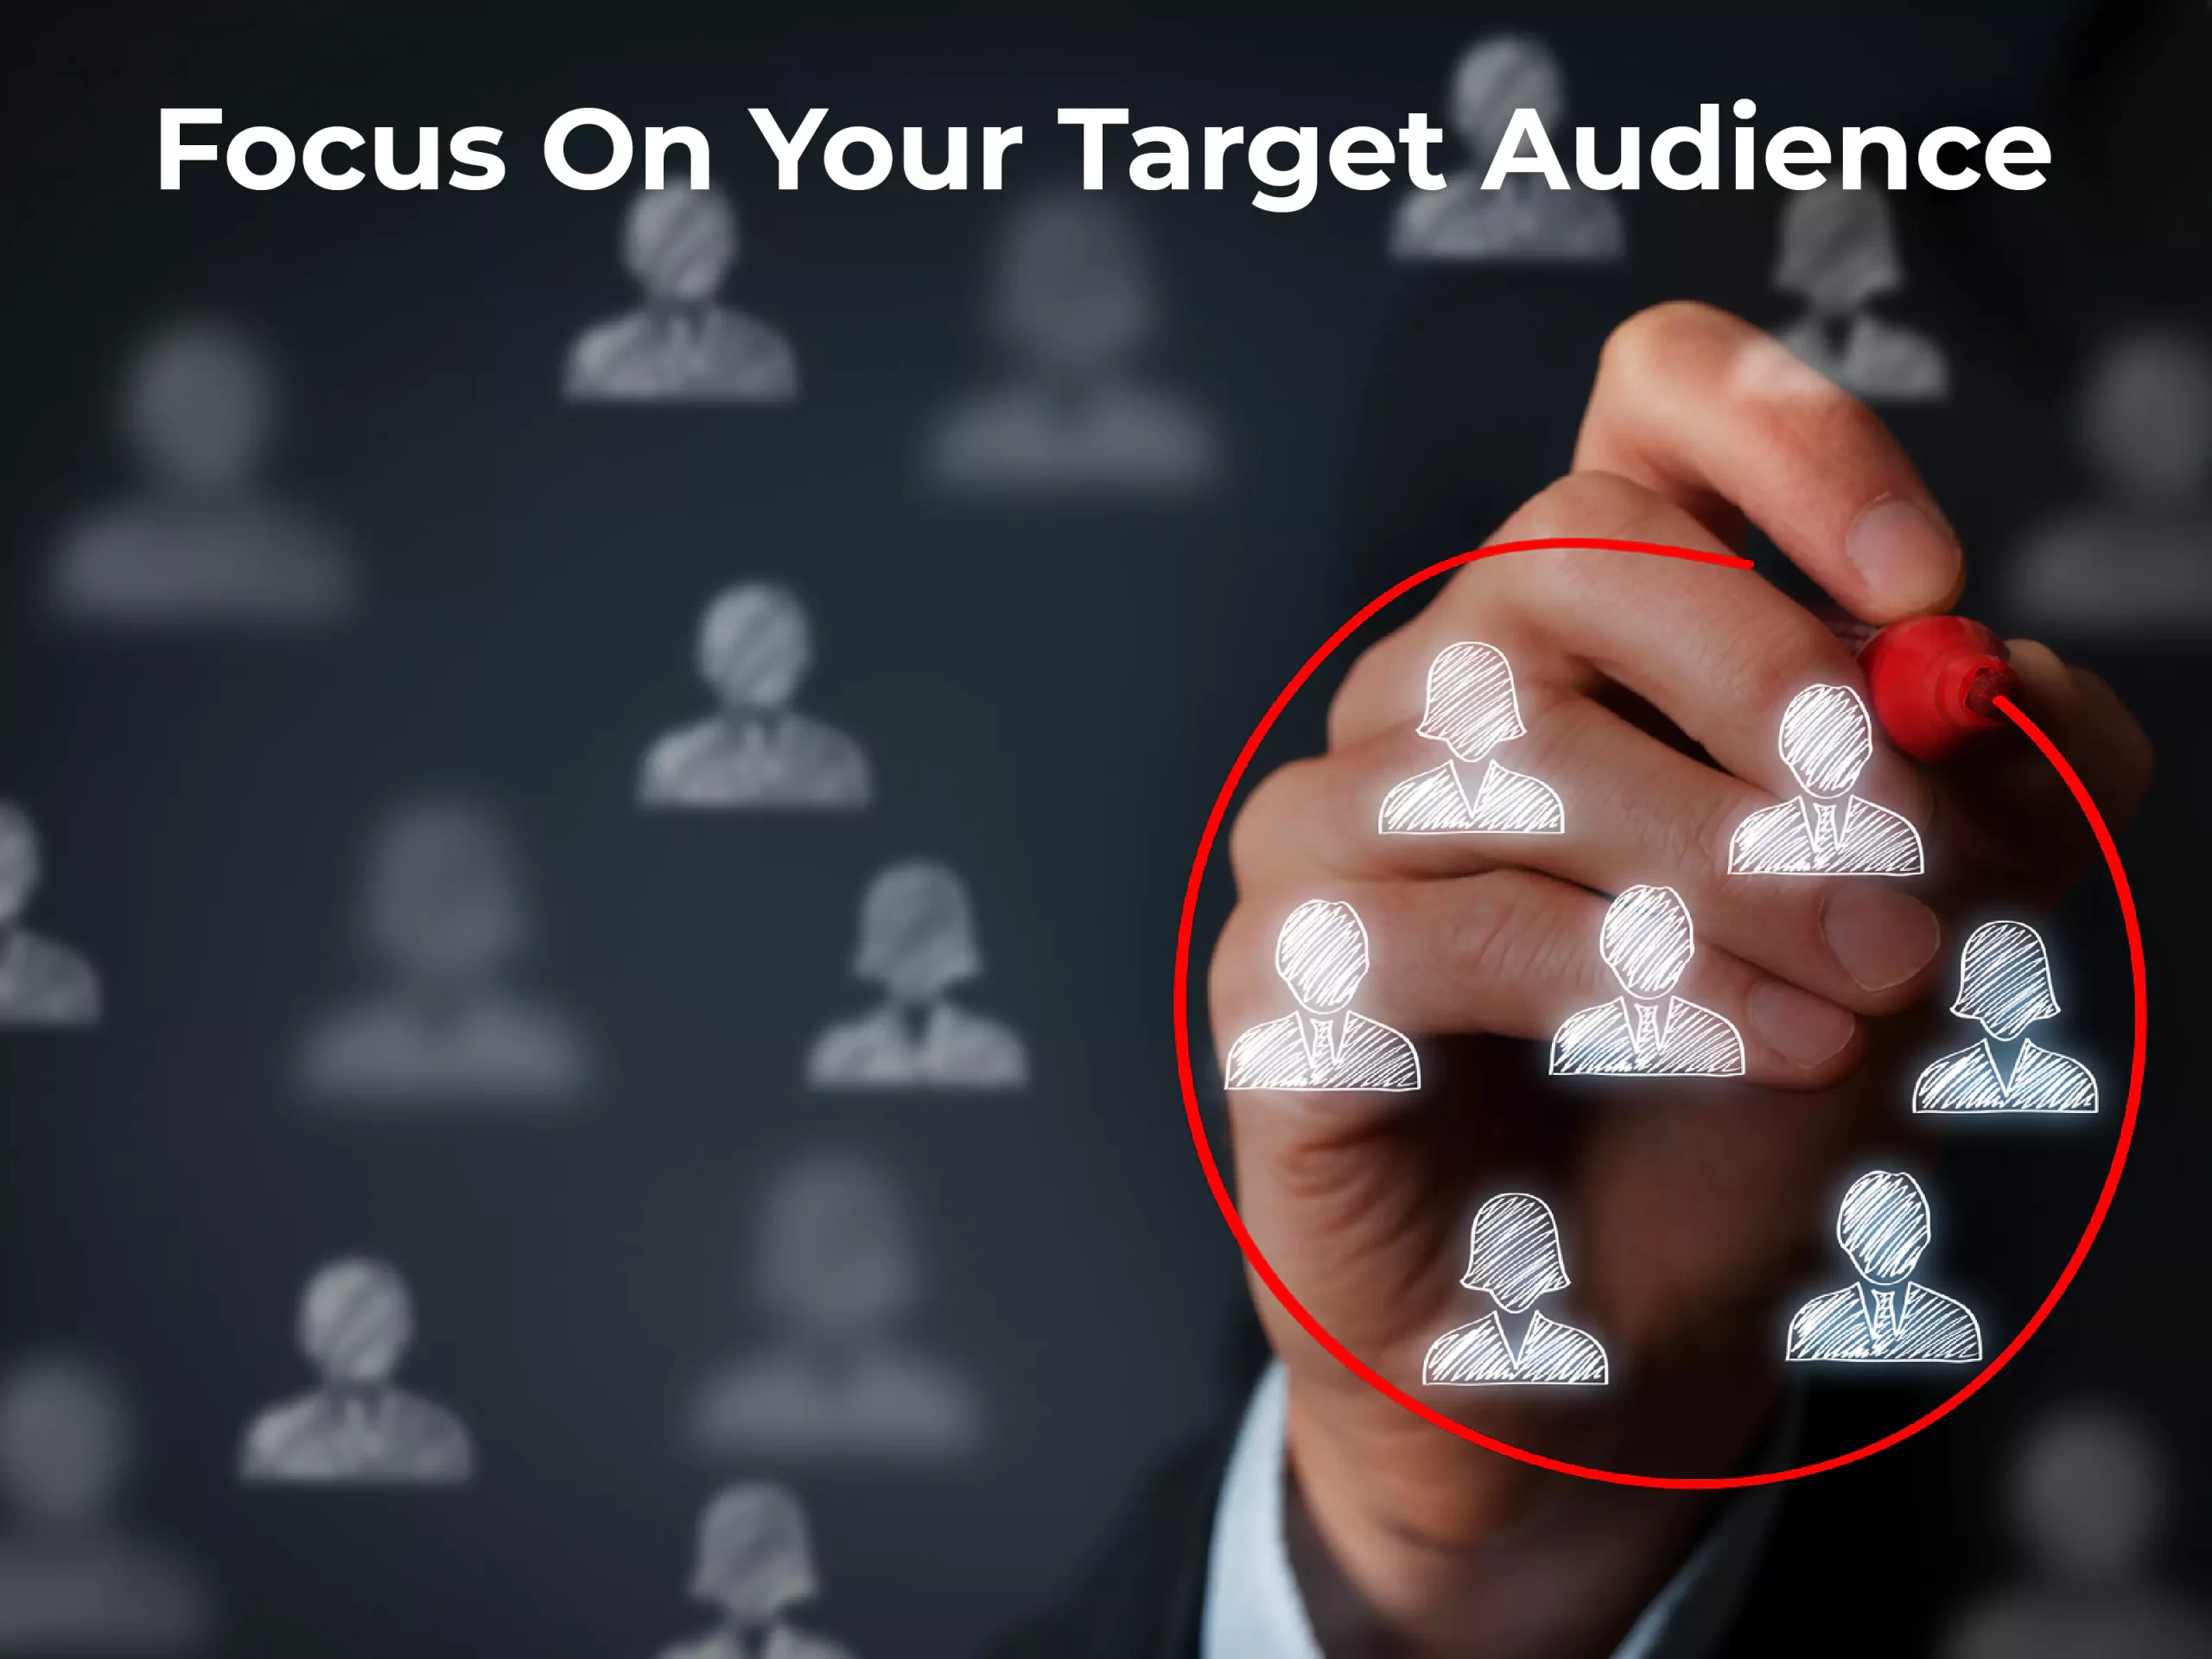 Focus On Your Target Audience